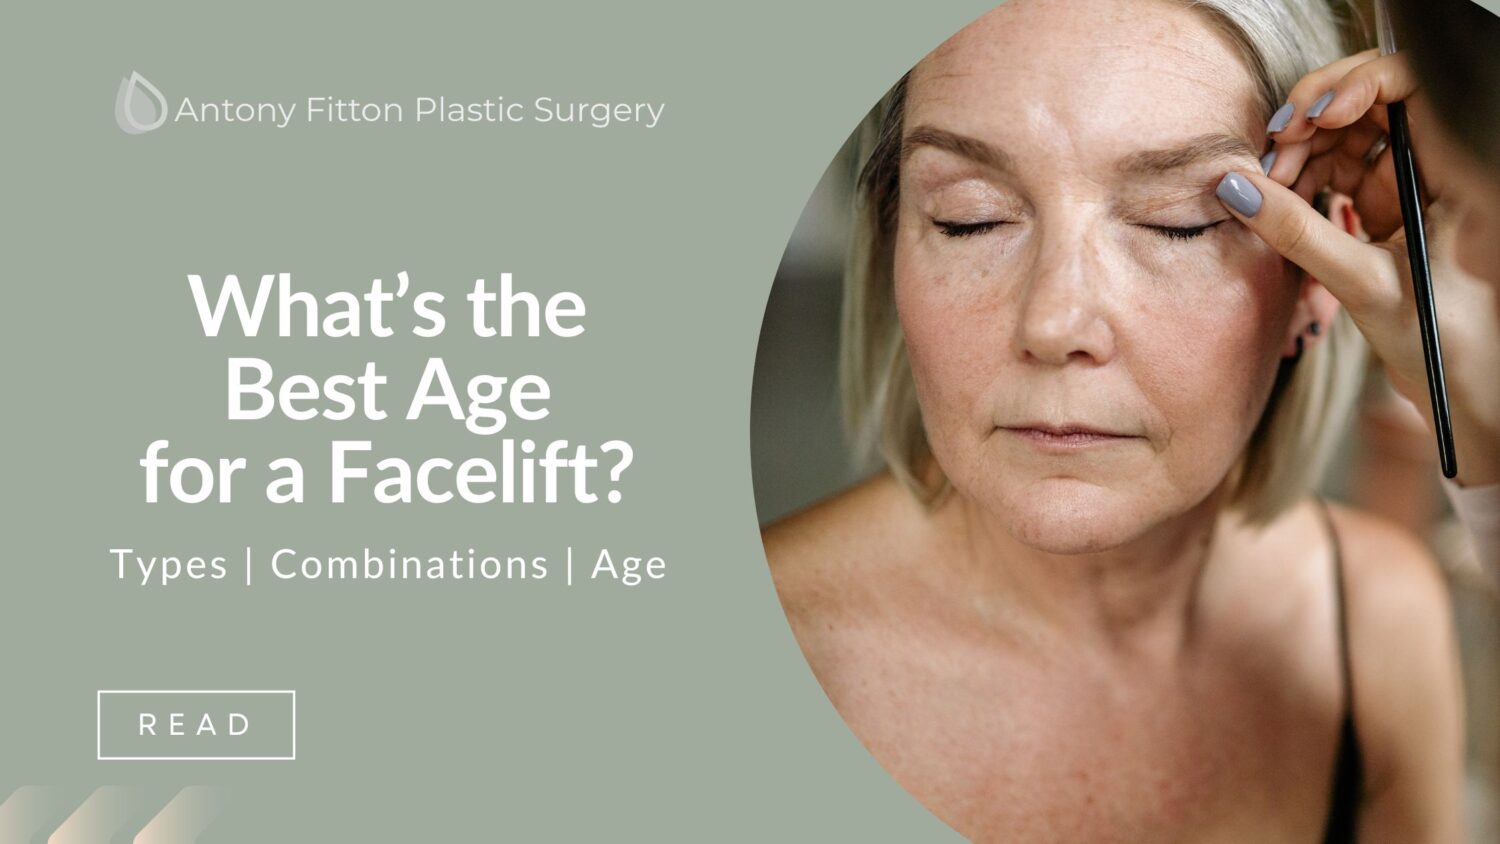 What’s the Best Age for a Facelift?